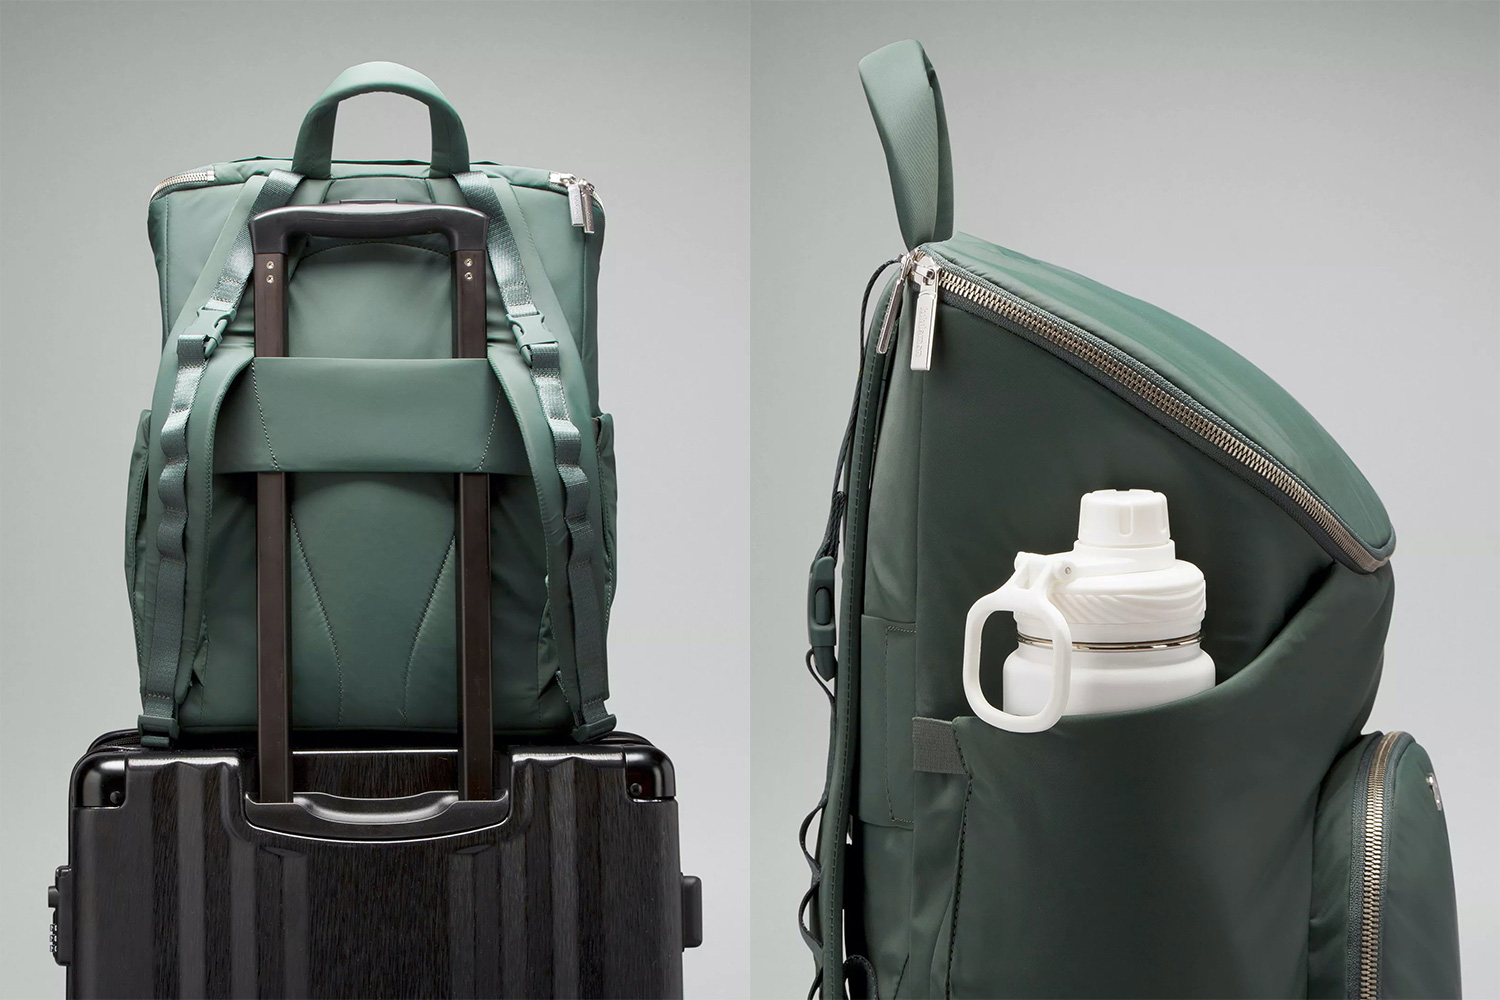 The Lululemon New Parent Backpack, shown with its pass-through strap for hooking to carry-on suitcases and its water bottle pouches on the sides